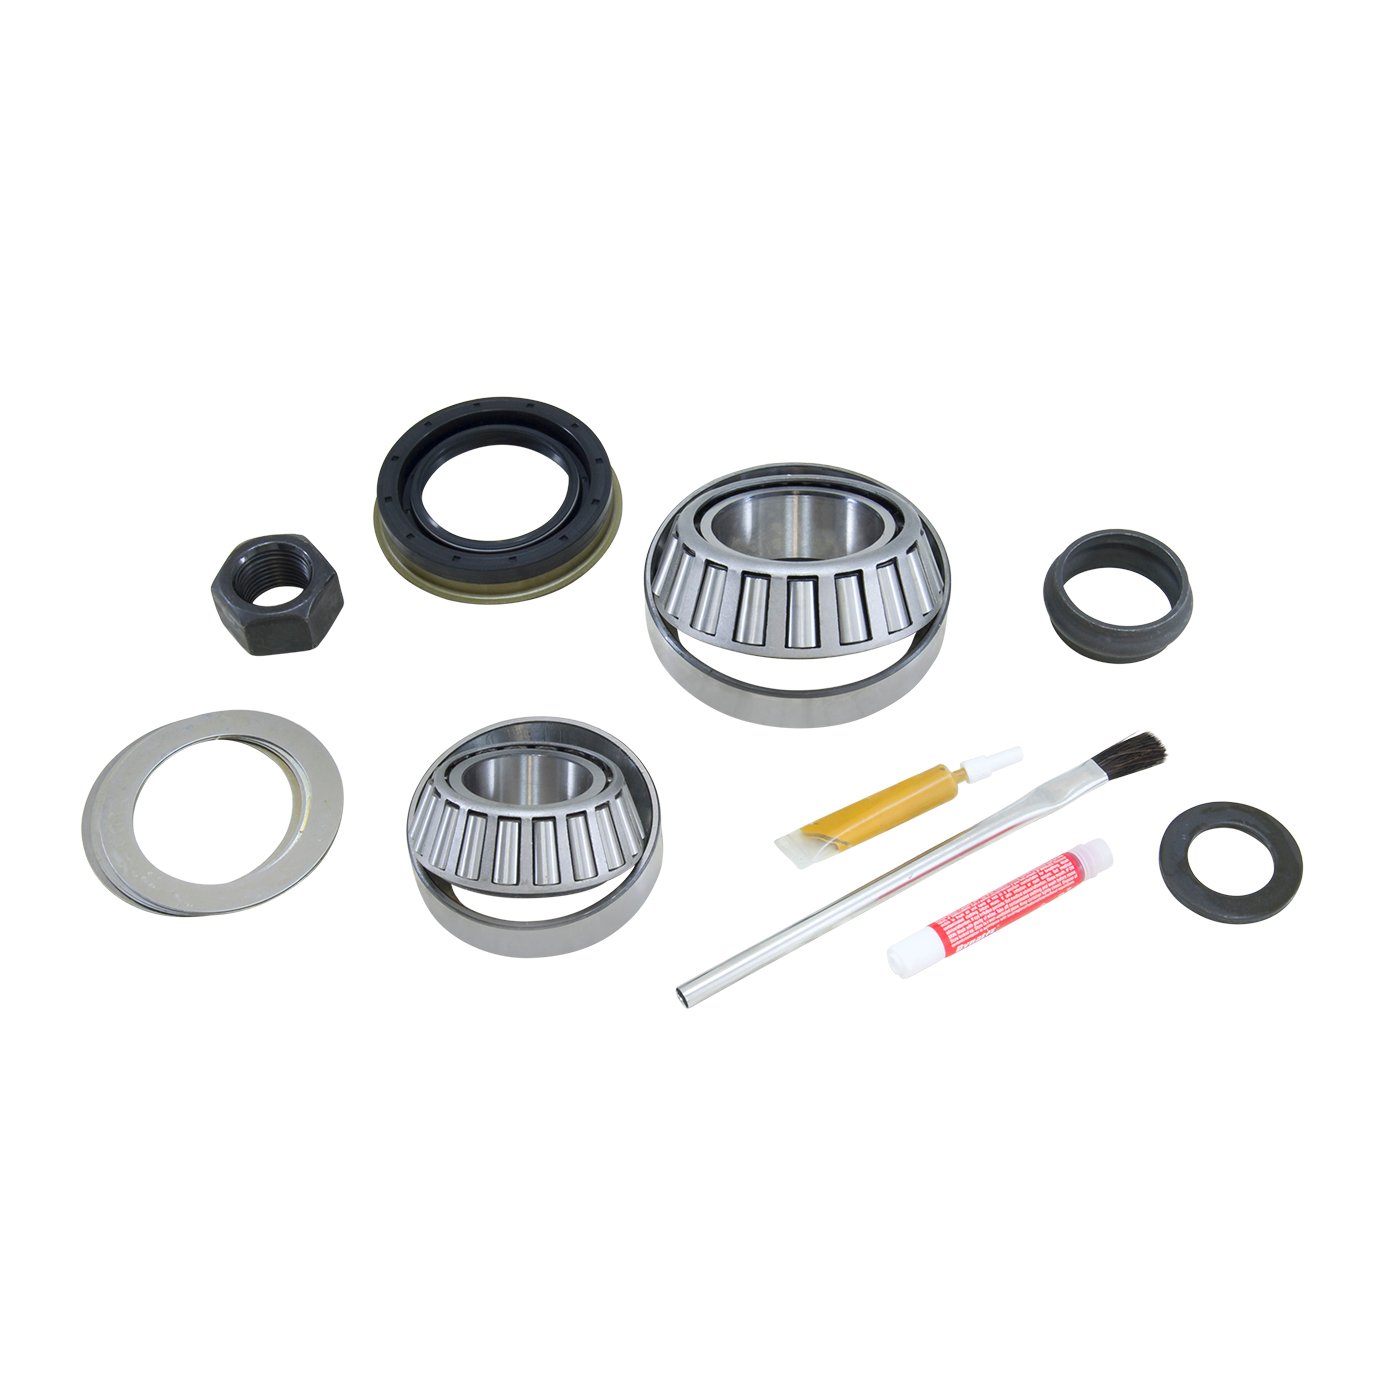 Pinion Install Kit For '70-'75 Chrysler 8.25 in. Differential